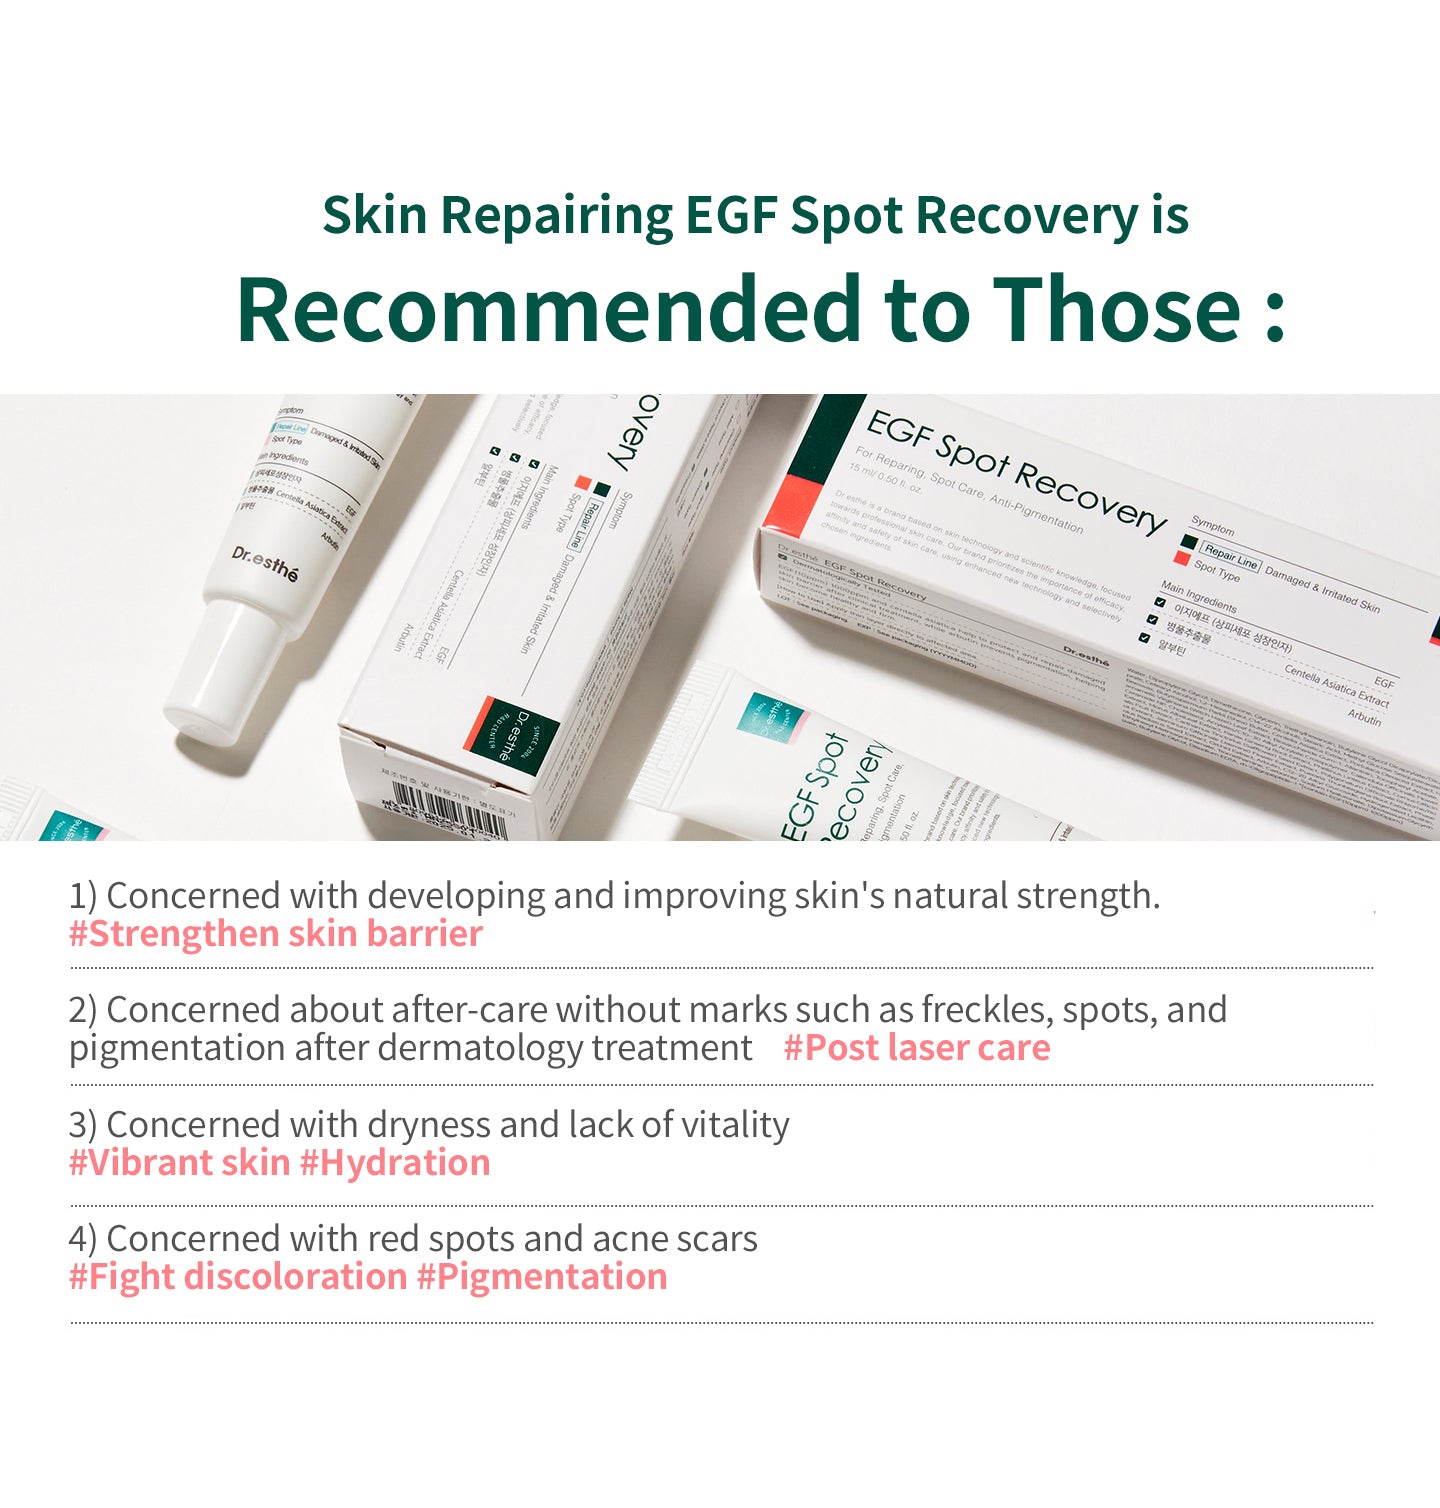 Skin repairing EGF spot recovery is recommended to those concerned with developing and improving skin's natural strength, concerned about after-care without marks such as freckles, spots, and pigmentation after dermatology treatment, concerned with drynes